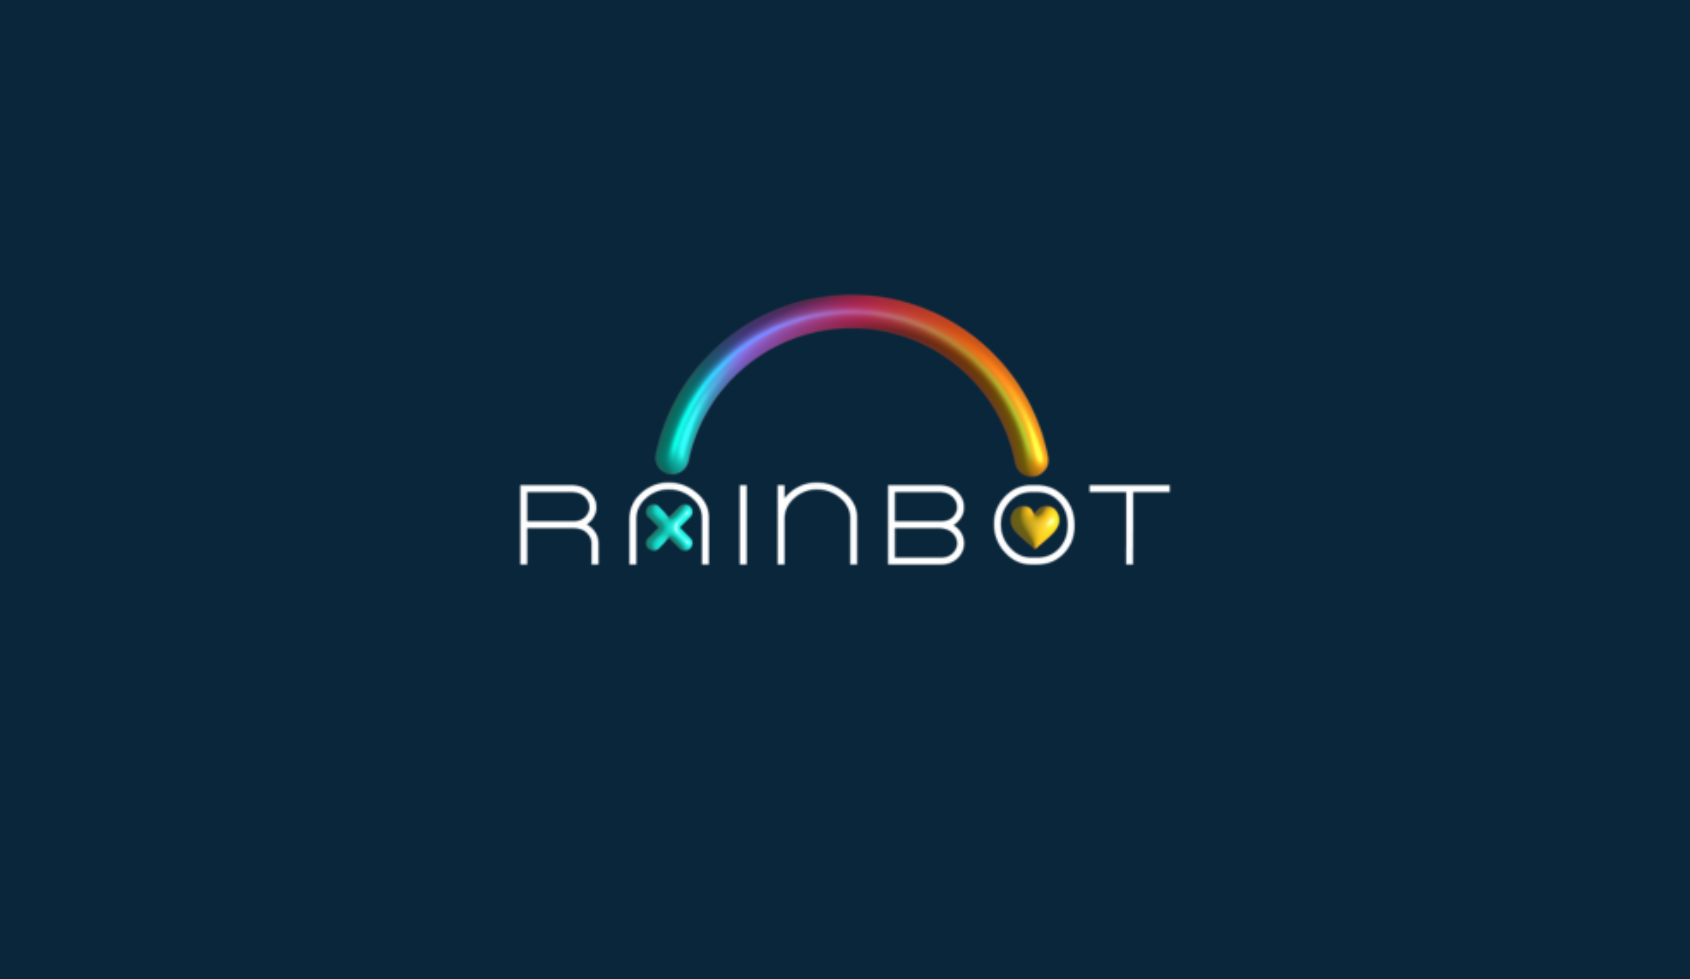 Rainbot: the first bot to transform LGBTIQ+ hate tweets into love poems